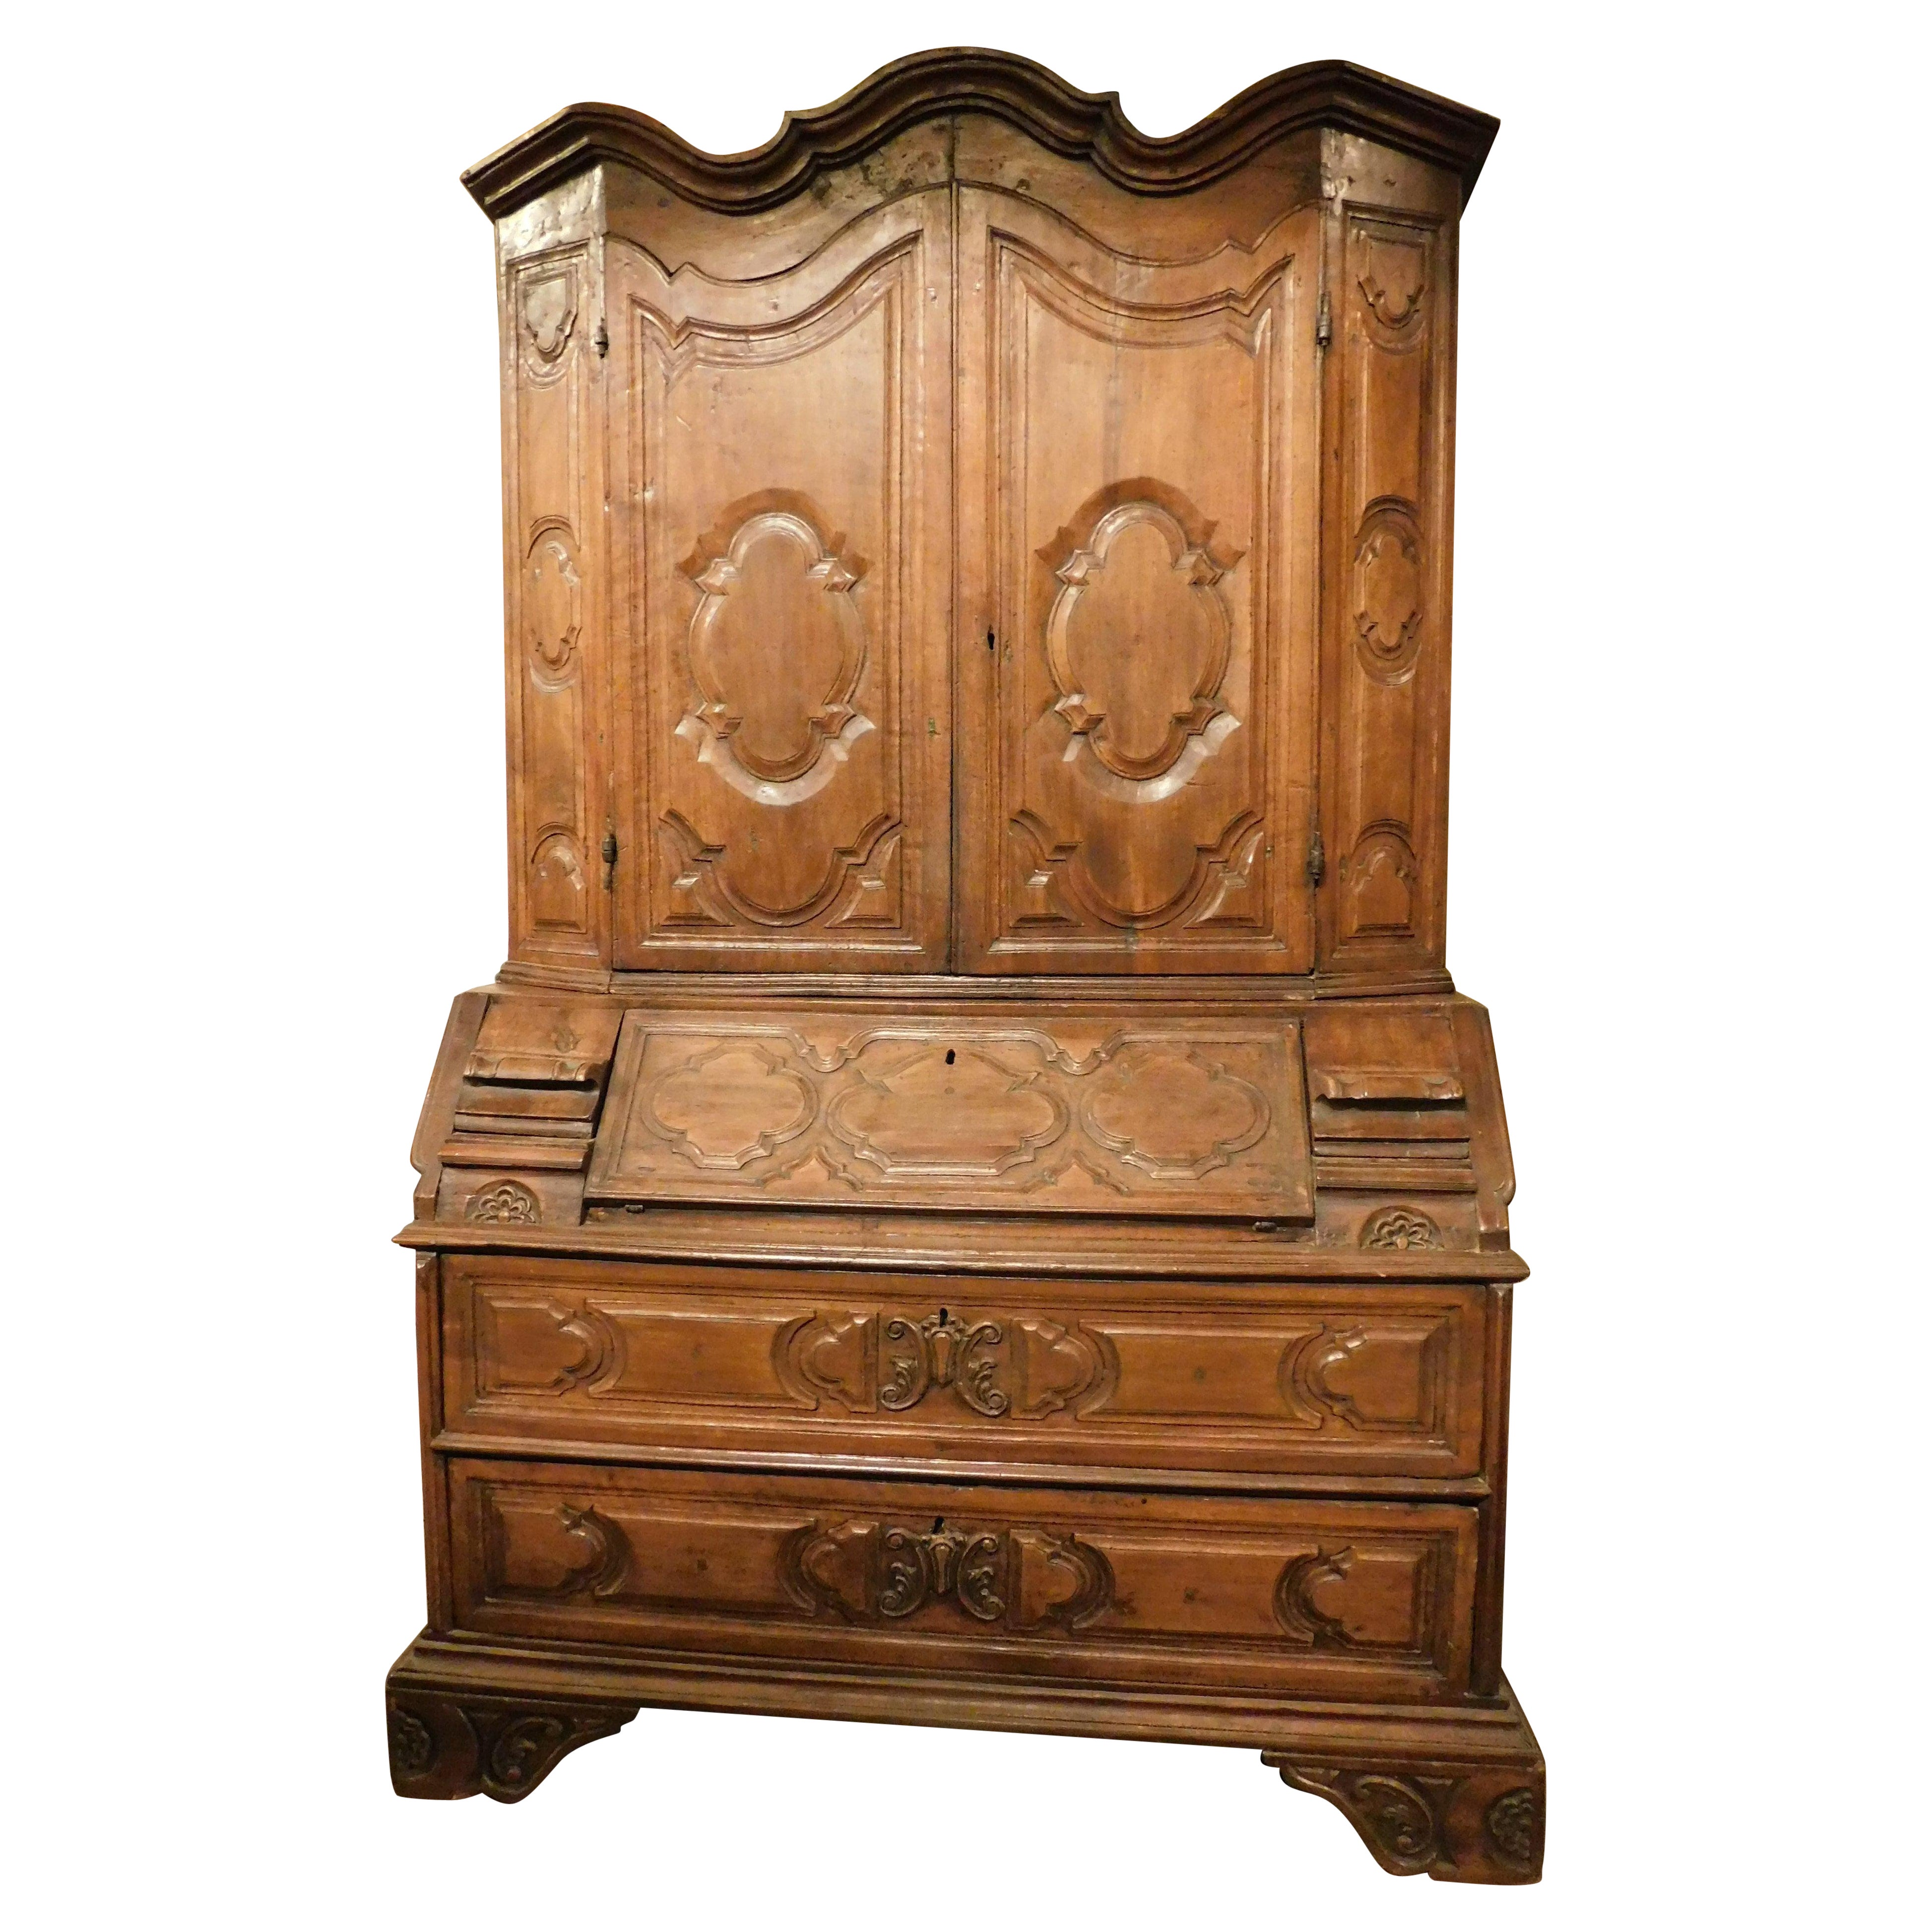 Trumeau, double body in carved walnut with doors, flap and drawers, Italy